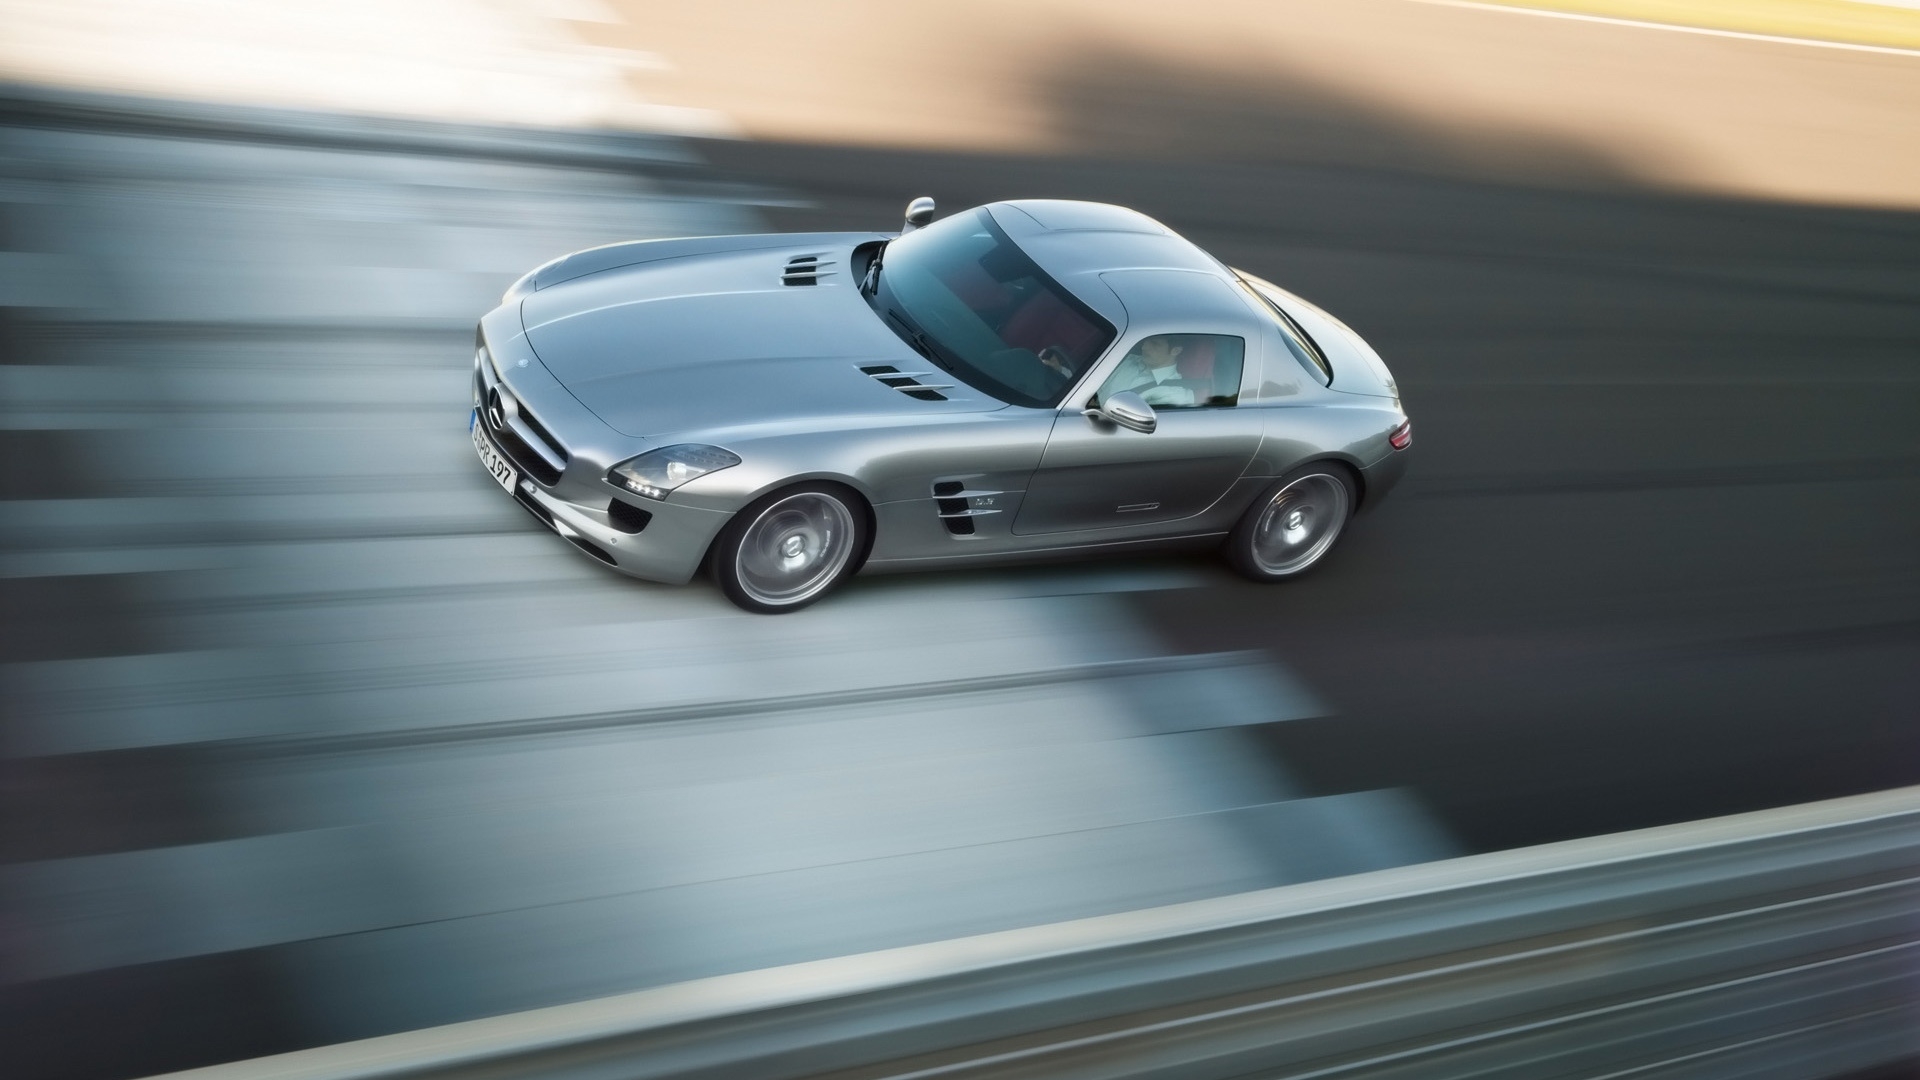 Mercedes-Benz SLS AMG Silver 2010 for 1920 x 1080 HDTV 1080p resolution